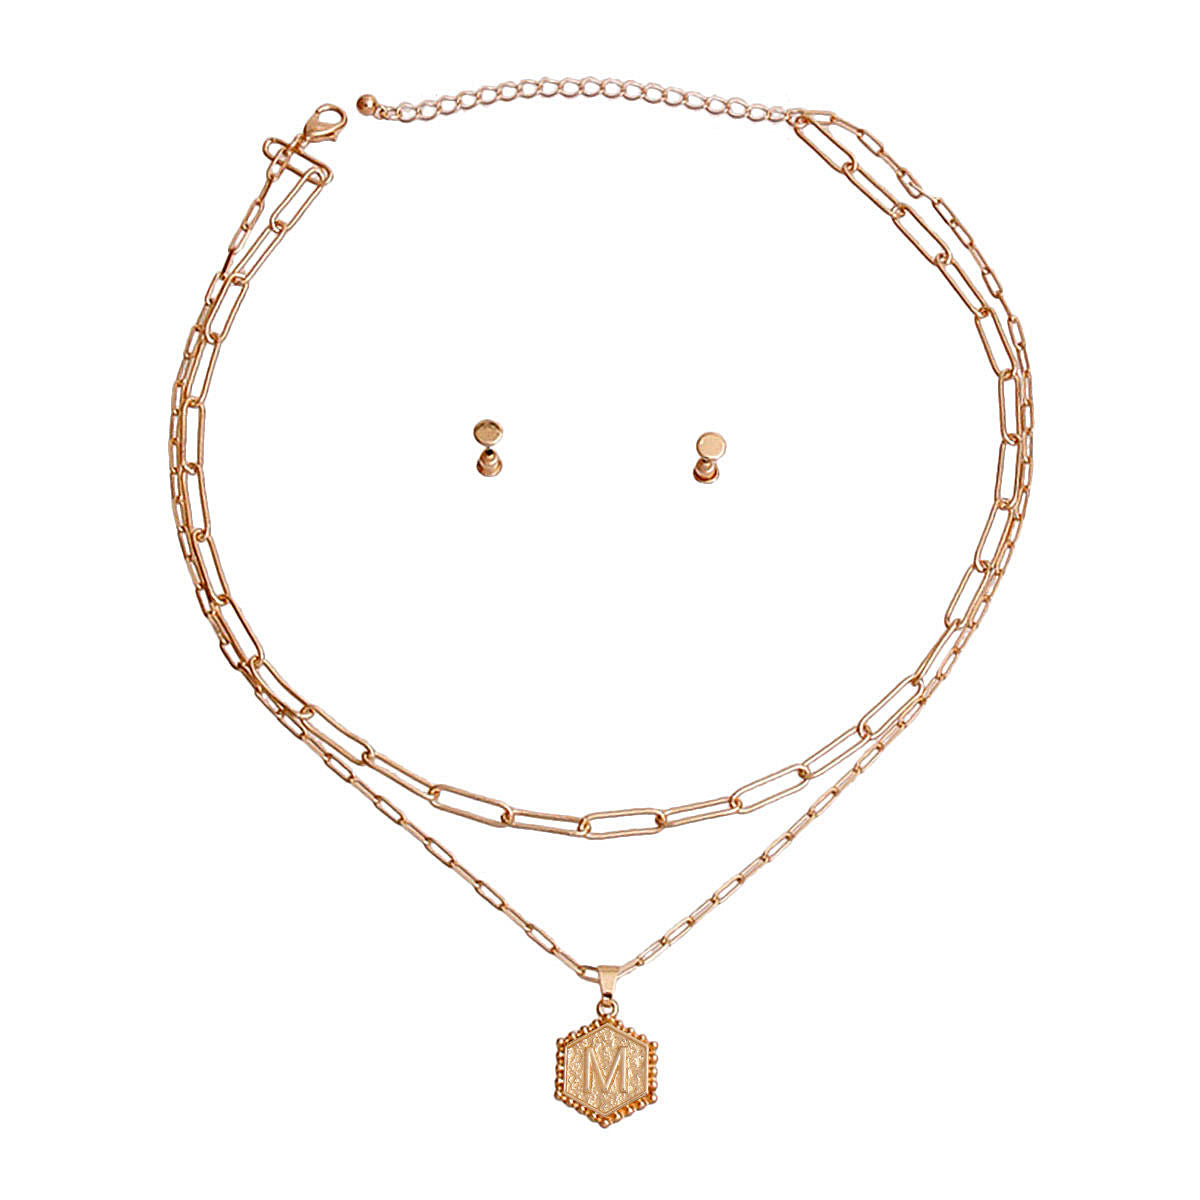 M Hexagon Initial Charm Necklace